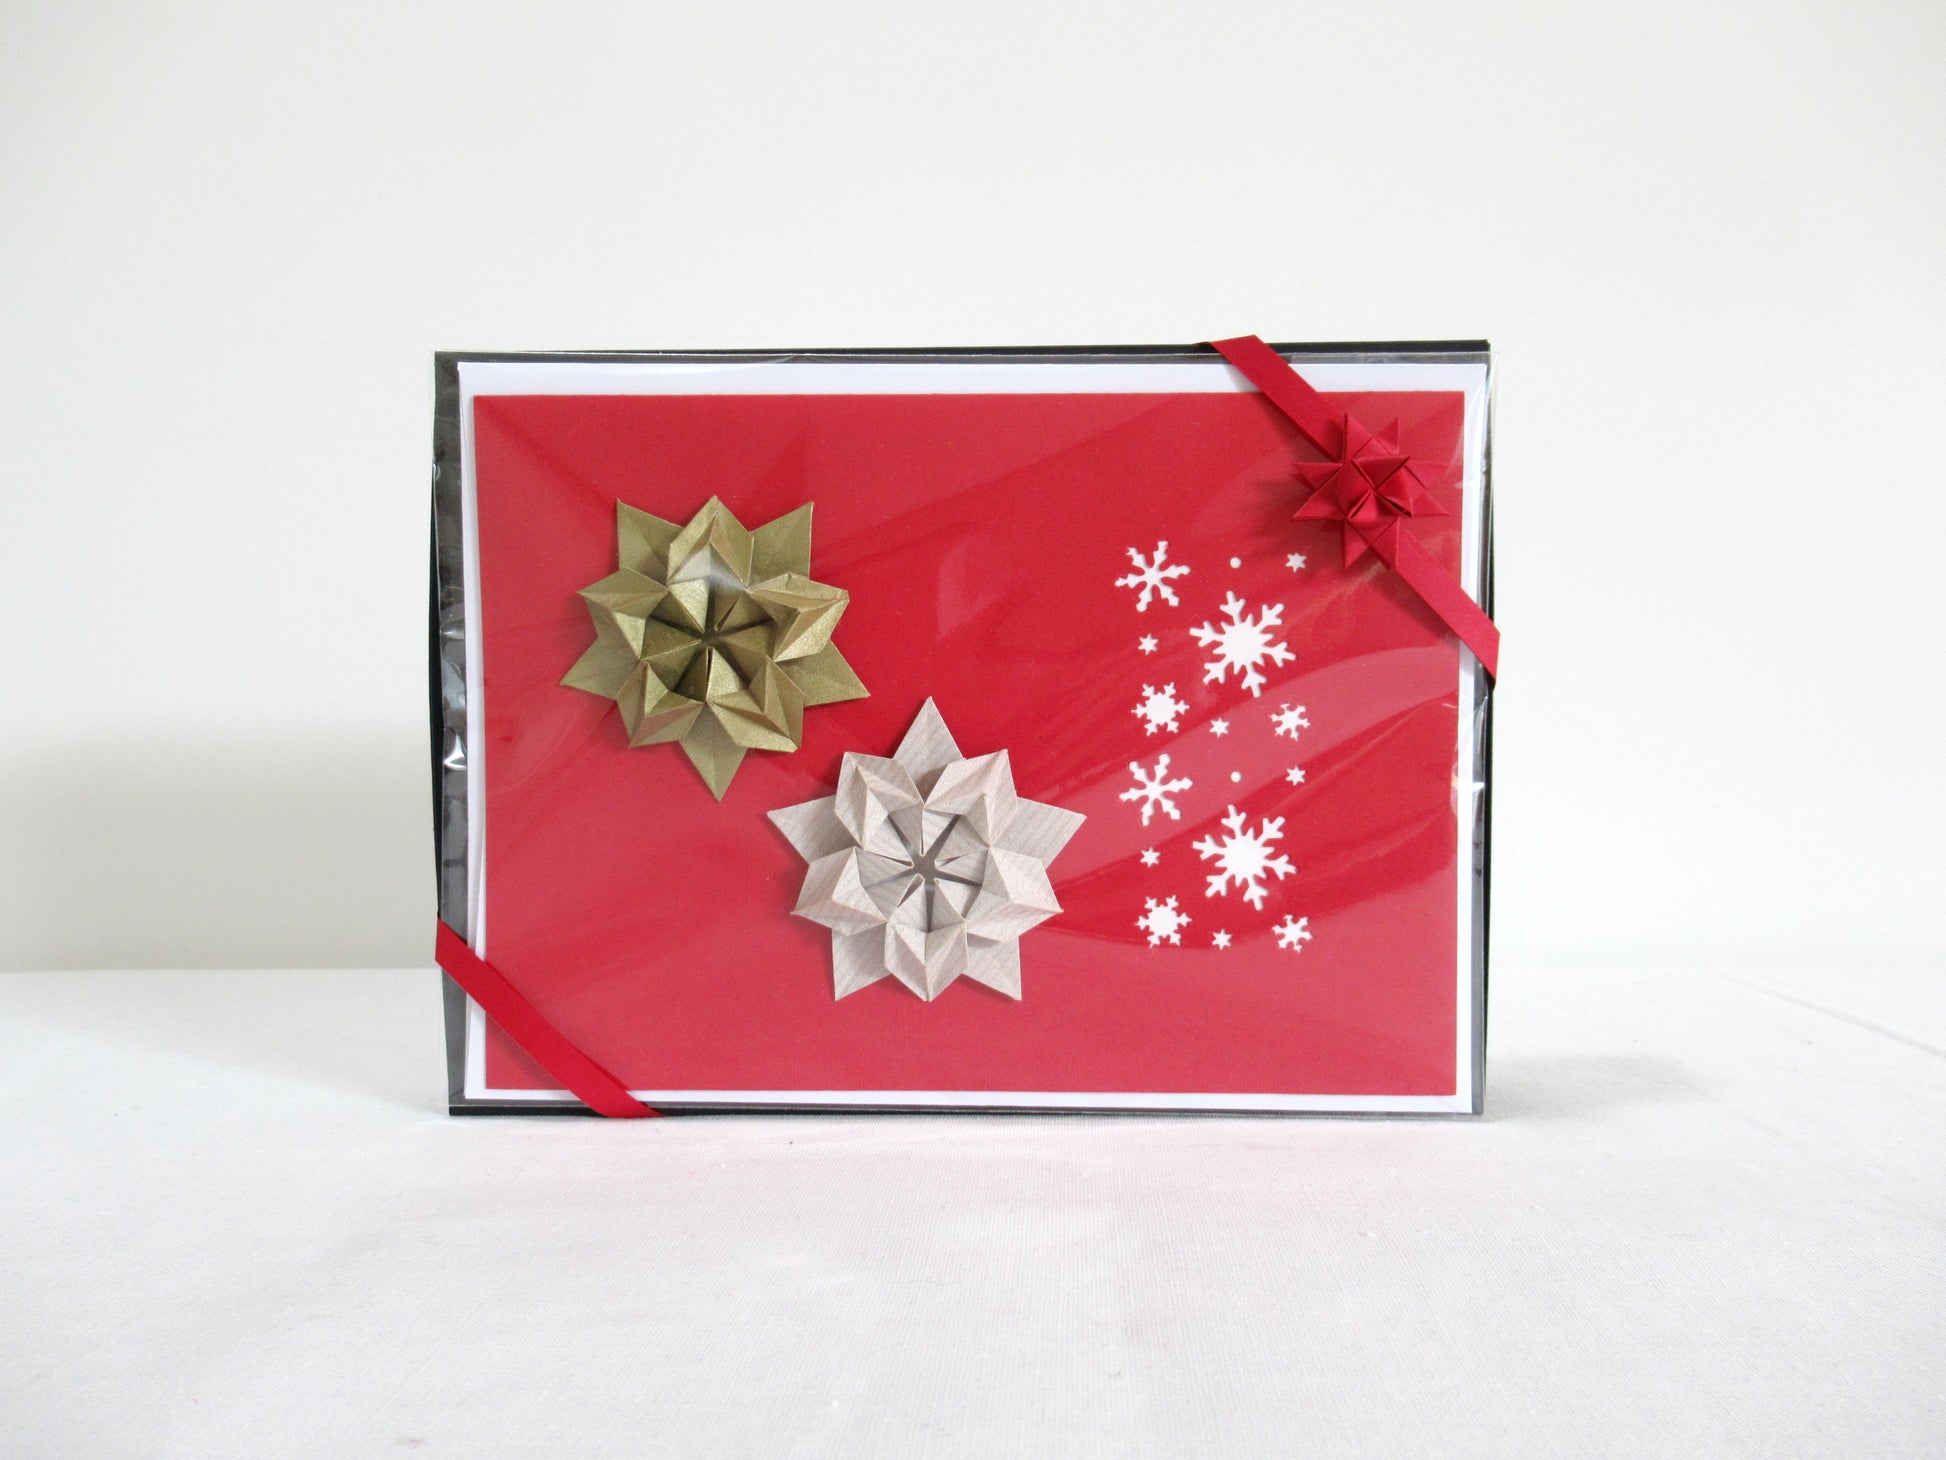 A red and white card, with snowflakes and origami stars, is inside a clear bag. The bag is attached to a black box by two opposite corners, wrapped with a red ribbon with a Froebel star in the corner.